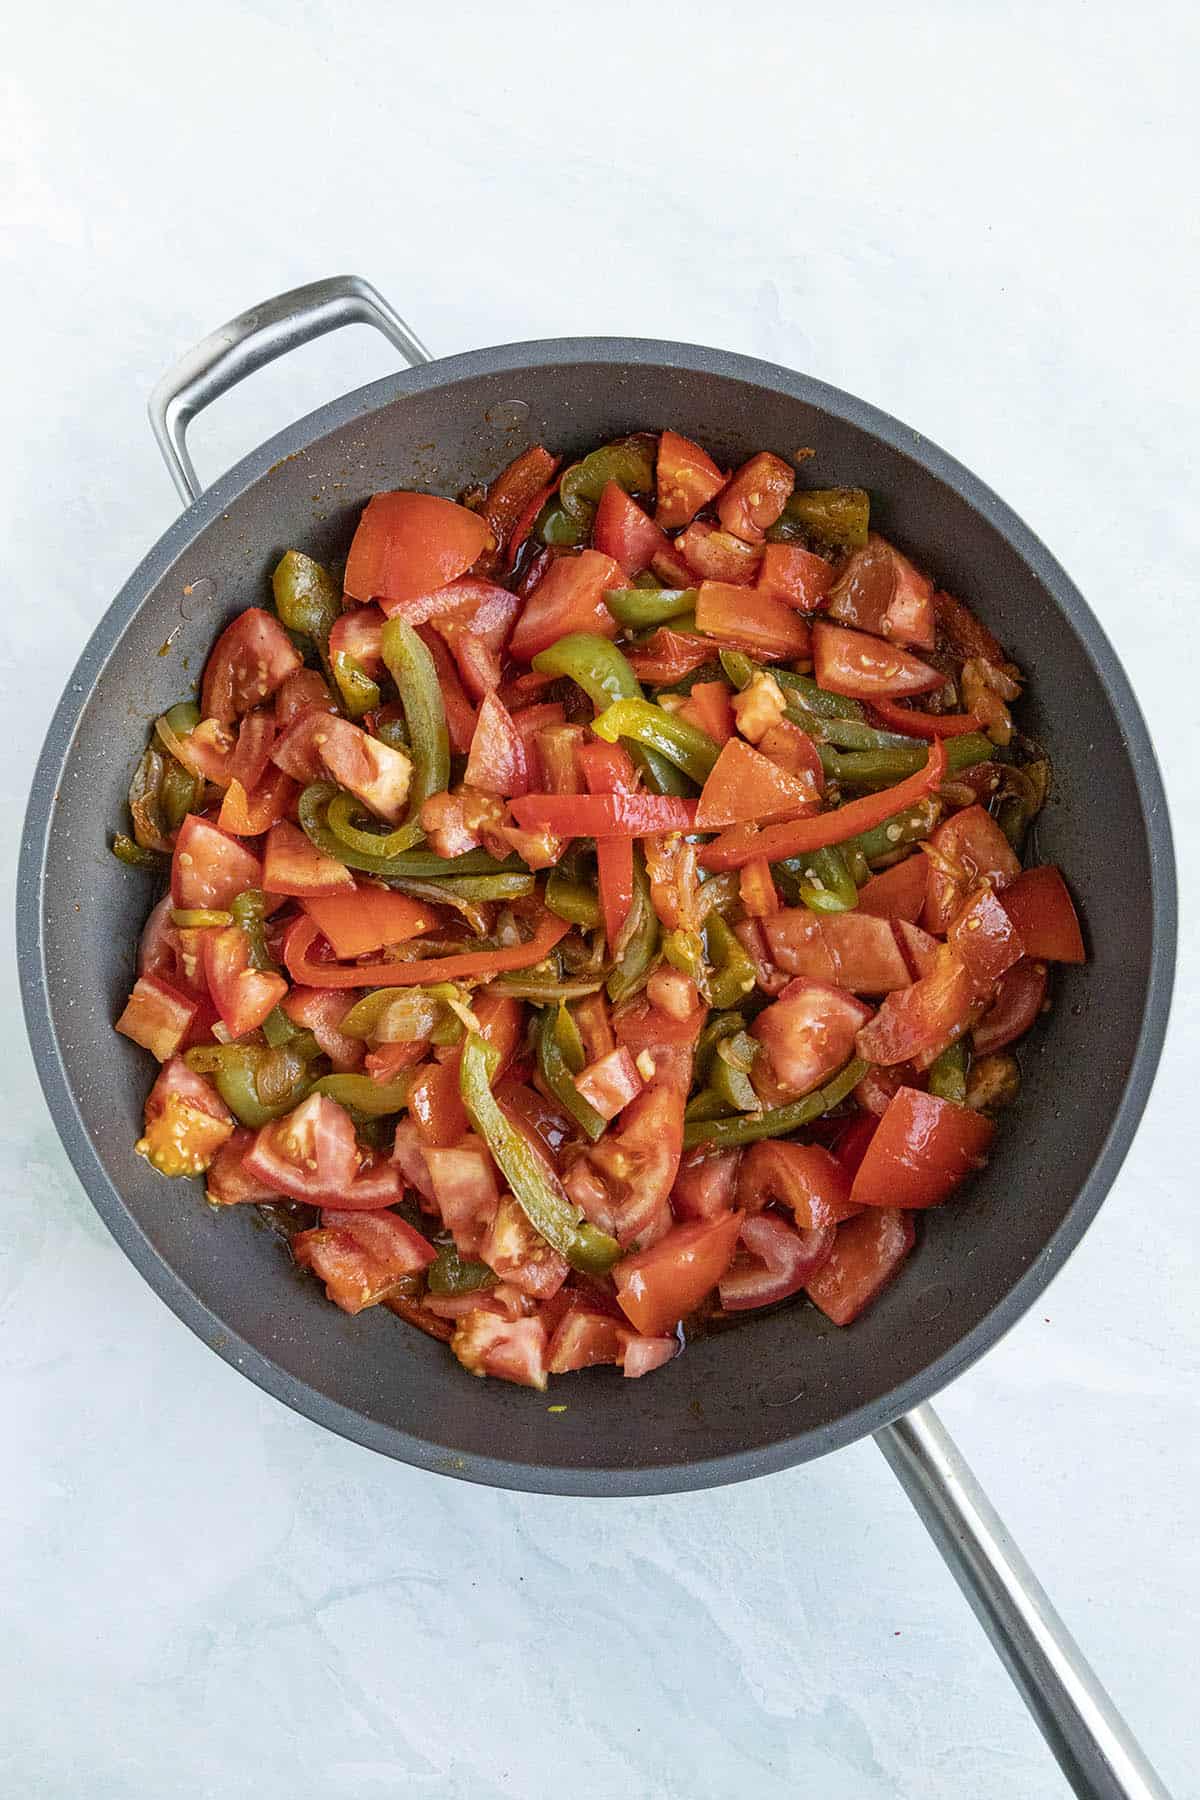 Tomatoes added to the pan to make Piperade